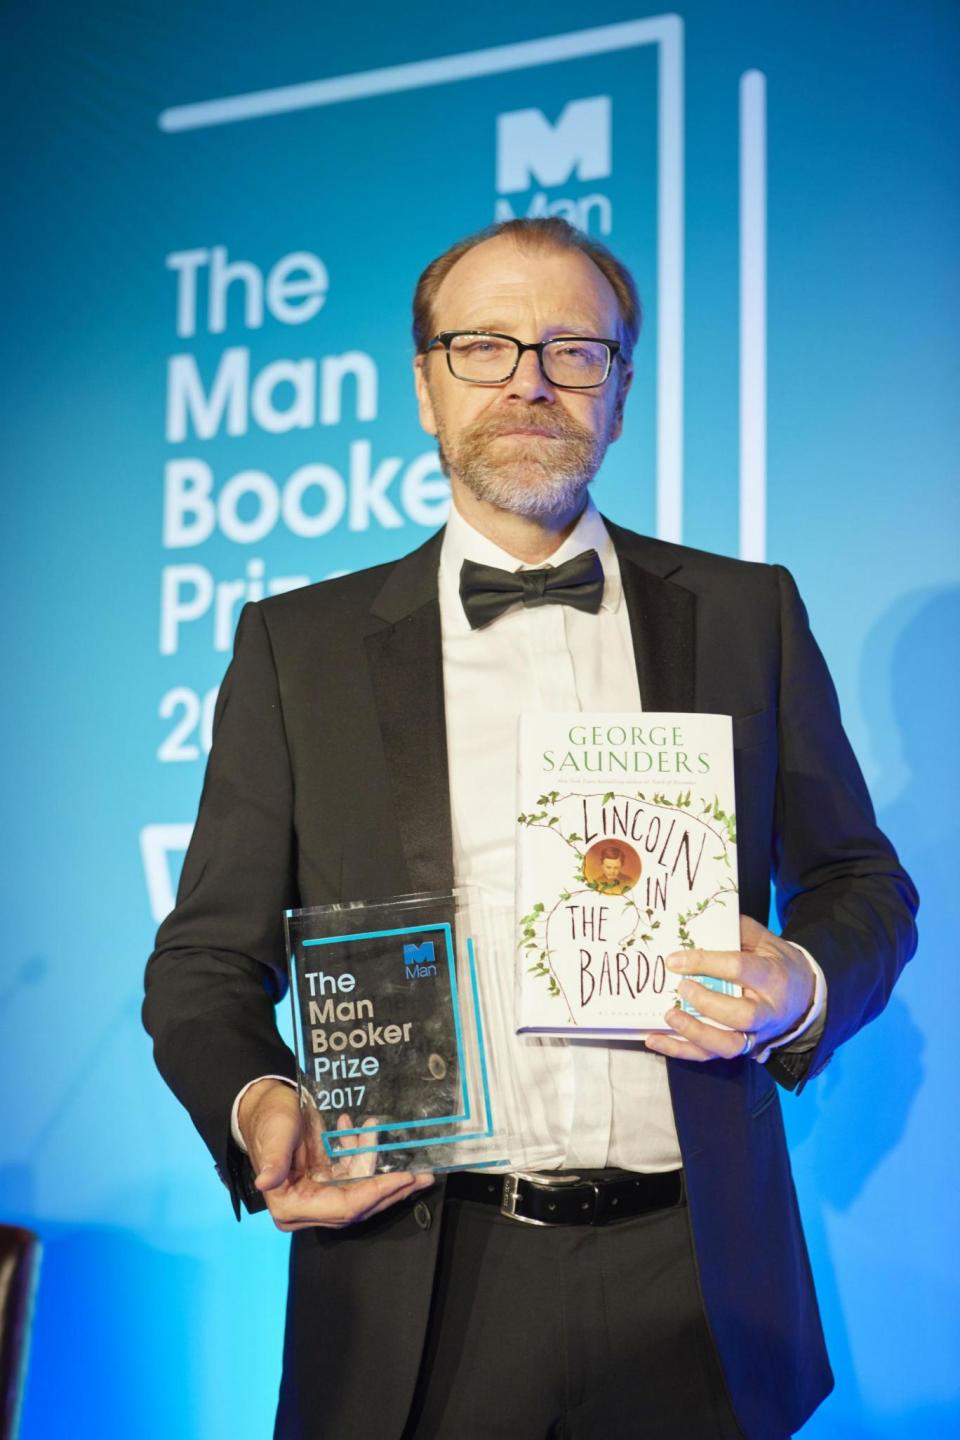 The American writer poses with his book, ‘Lincoln in the Bardo’, after winning the 2017 Man Booker Prize